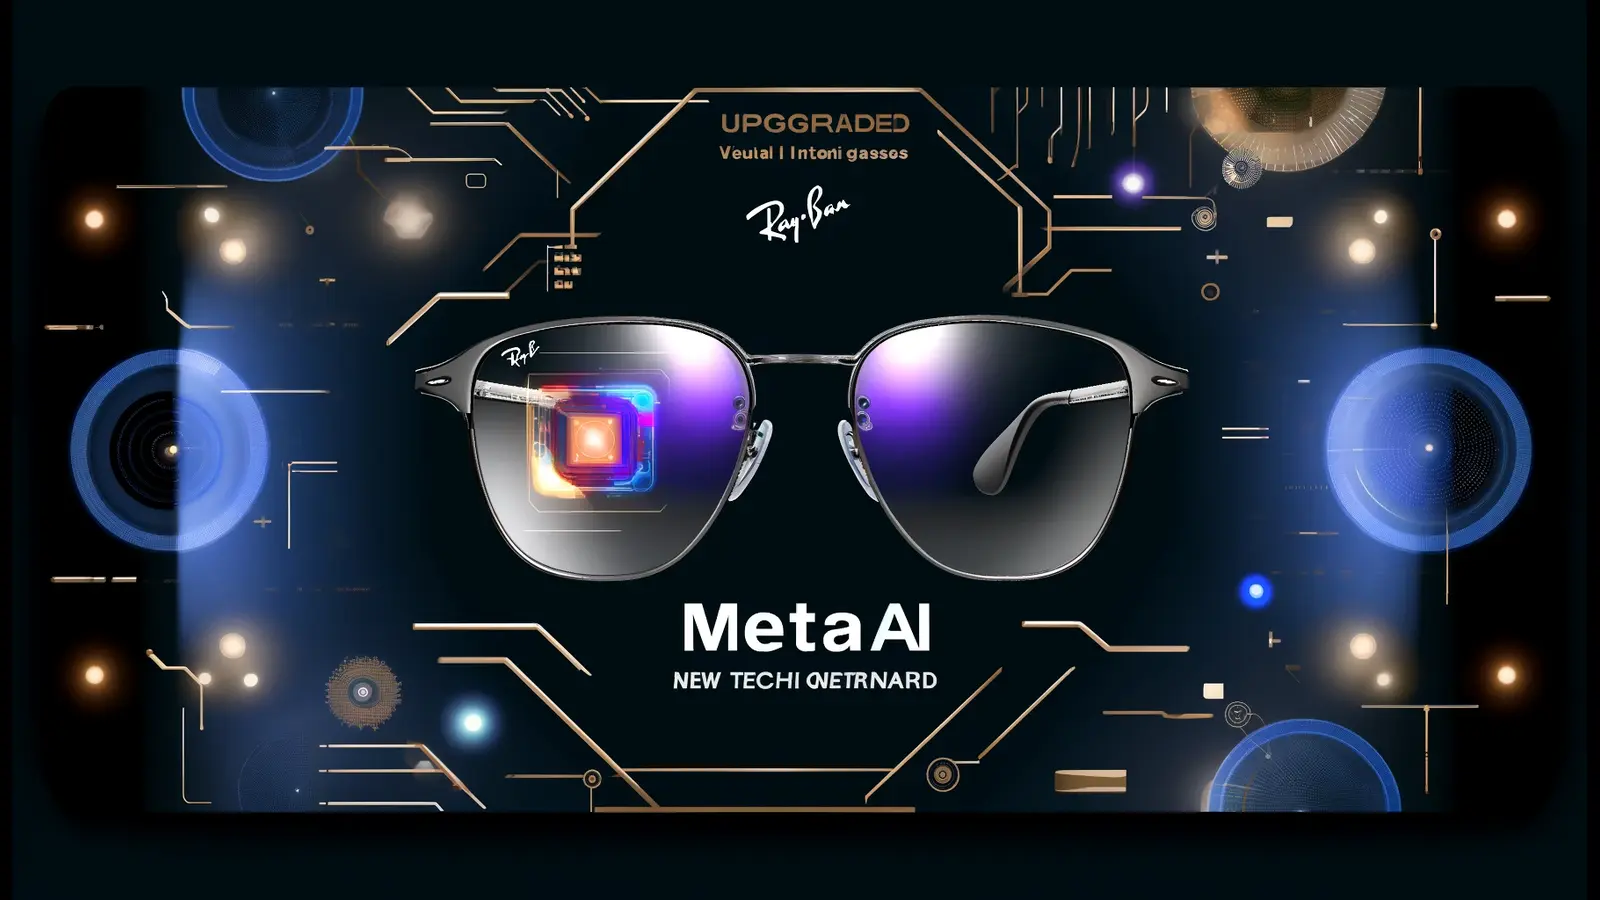 Ray-Ban Meta Glasses Upgrade with AI Integration Sets New Tech Standard